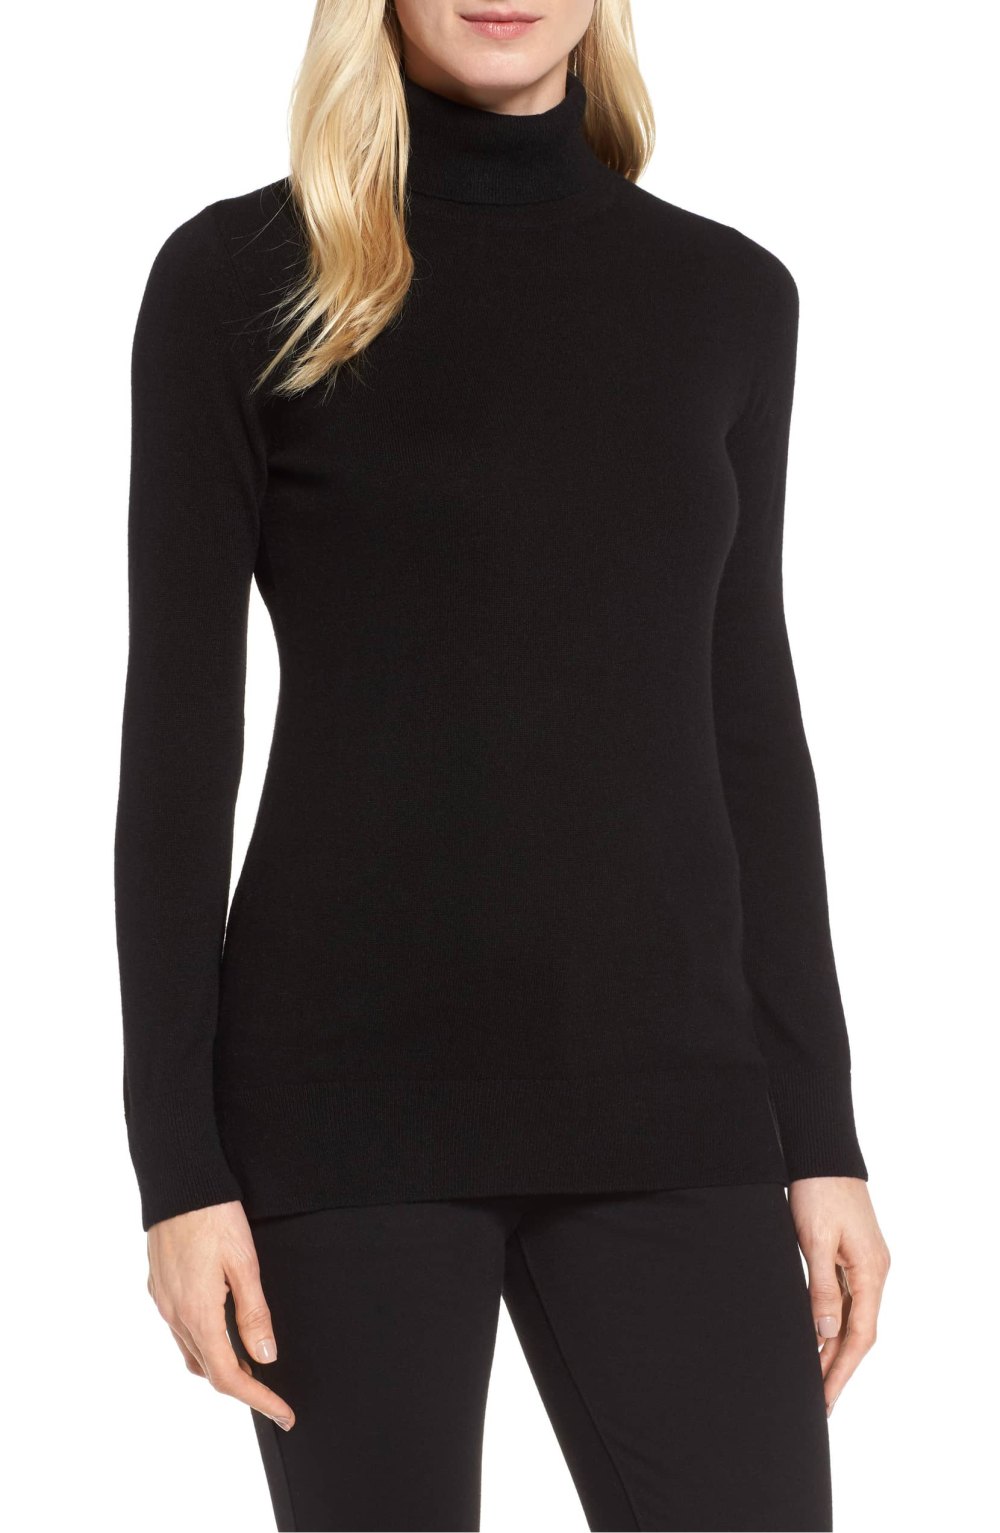 This Cashmere Black Turtleneck Can Be Styled so Many Ways | Us Weekly